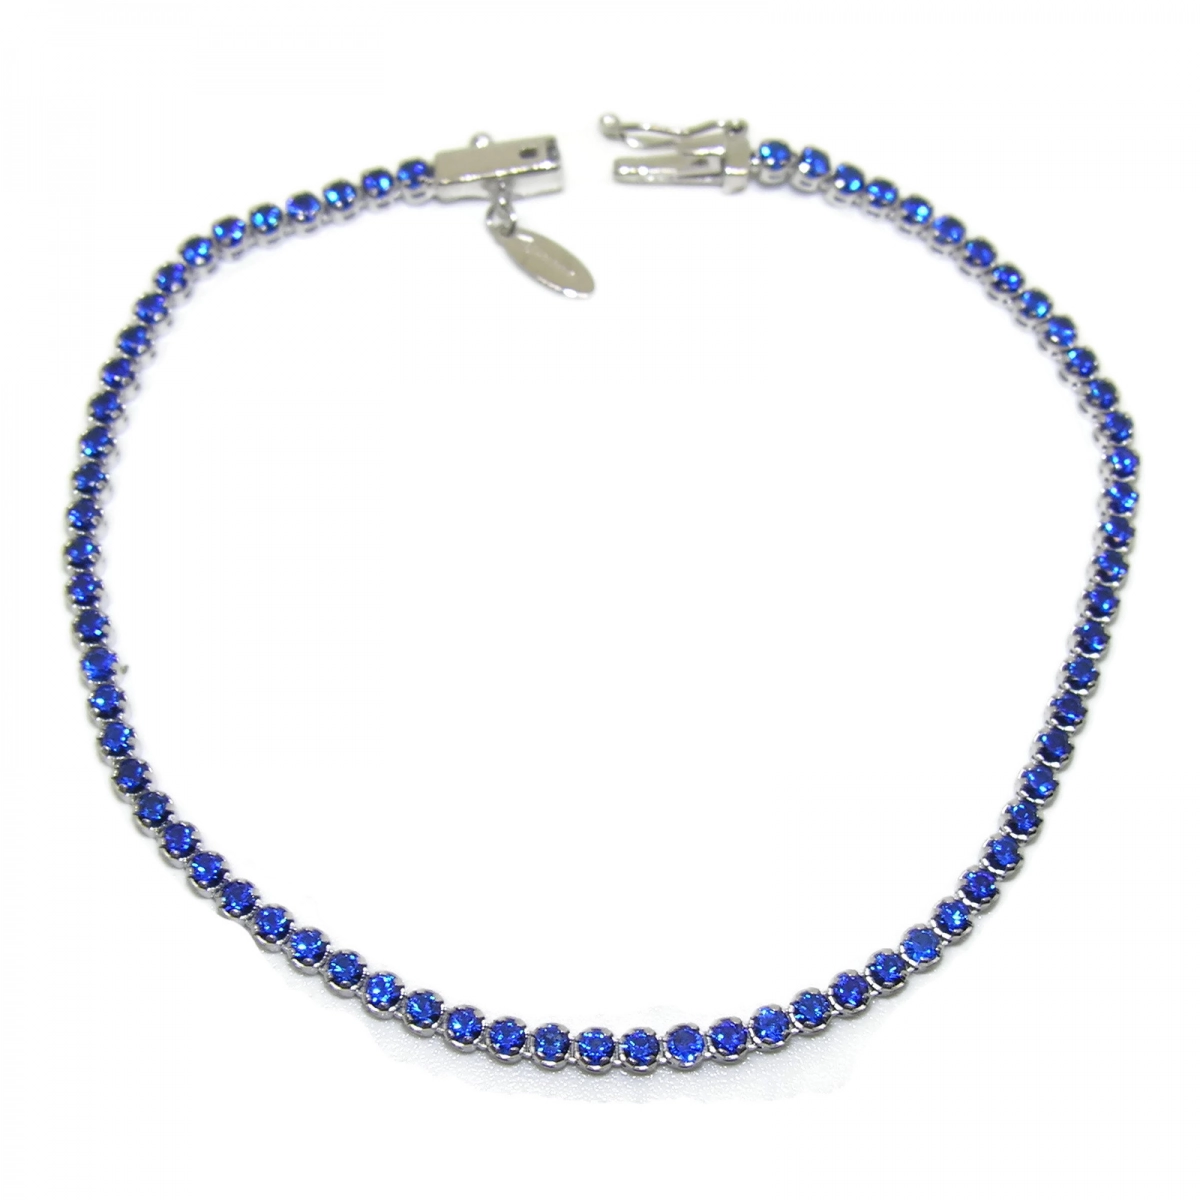 BRACELET TYPE RIVIERE IN 18K WHITE GOLD WITH 70 ZIRCONS BLUE OF THE BEST QUALITY. 18.5 CM NEVER SAY NEVER